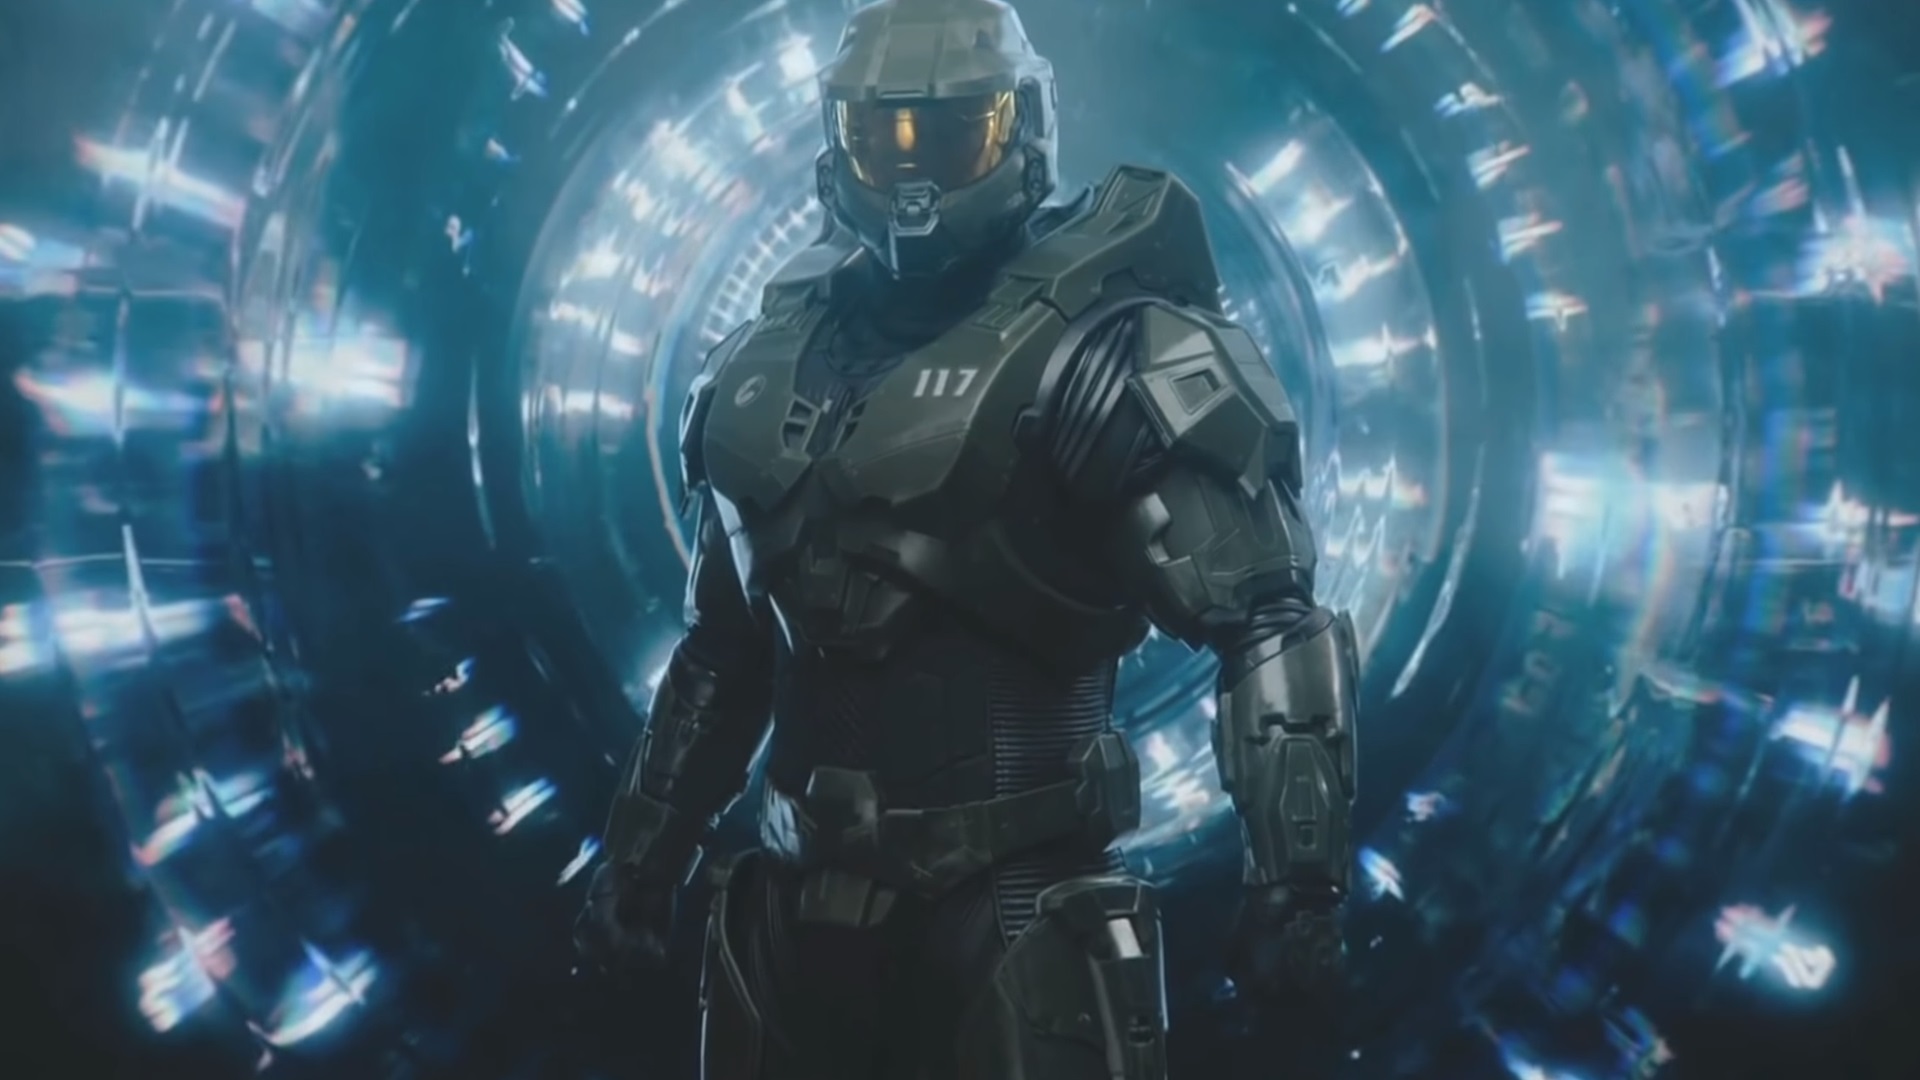 Master Chief in the intro sequence of the Halo TV series.